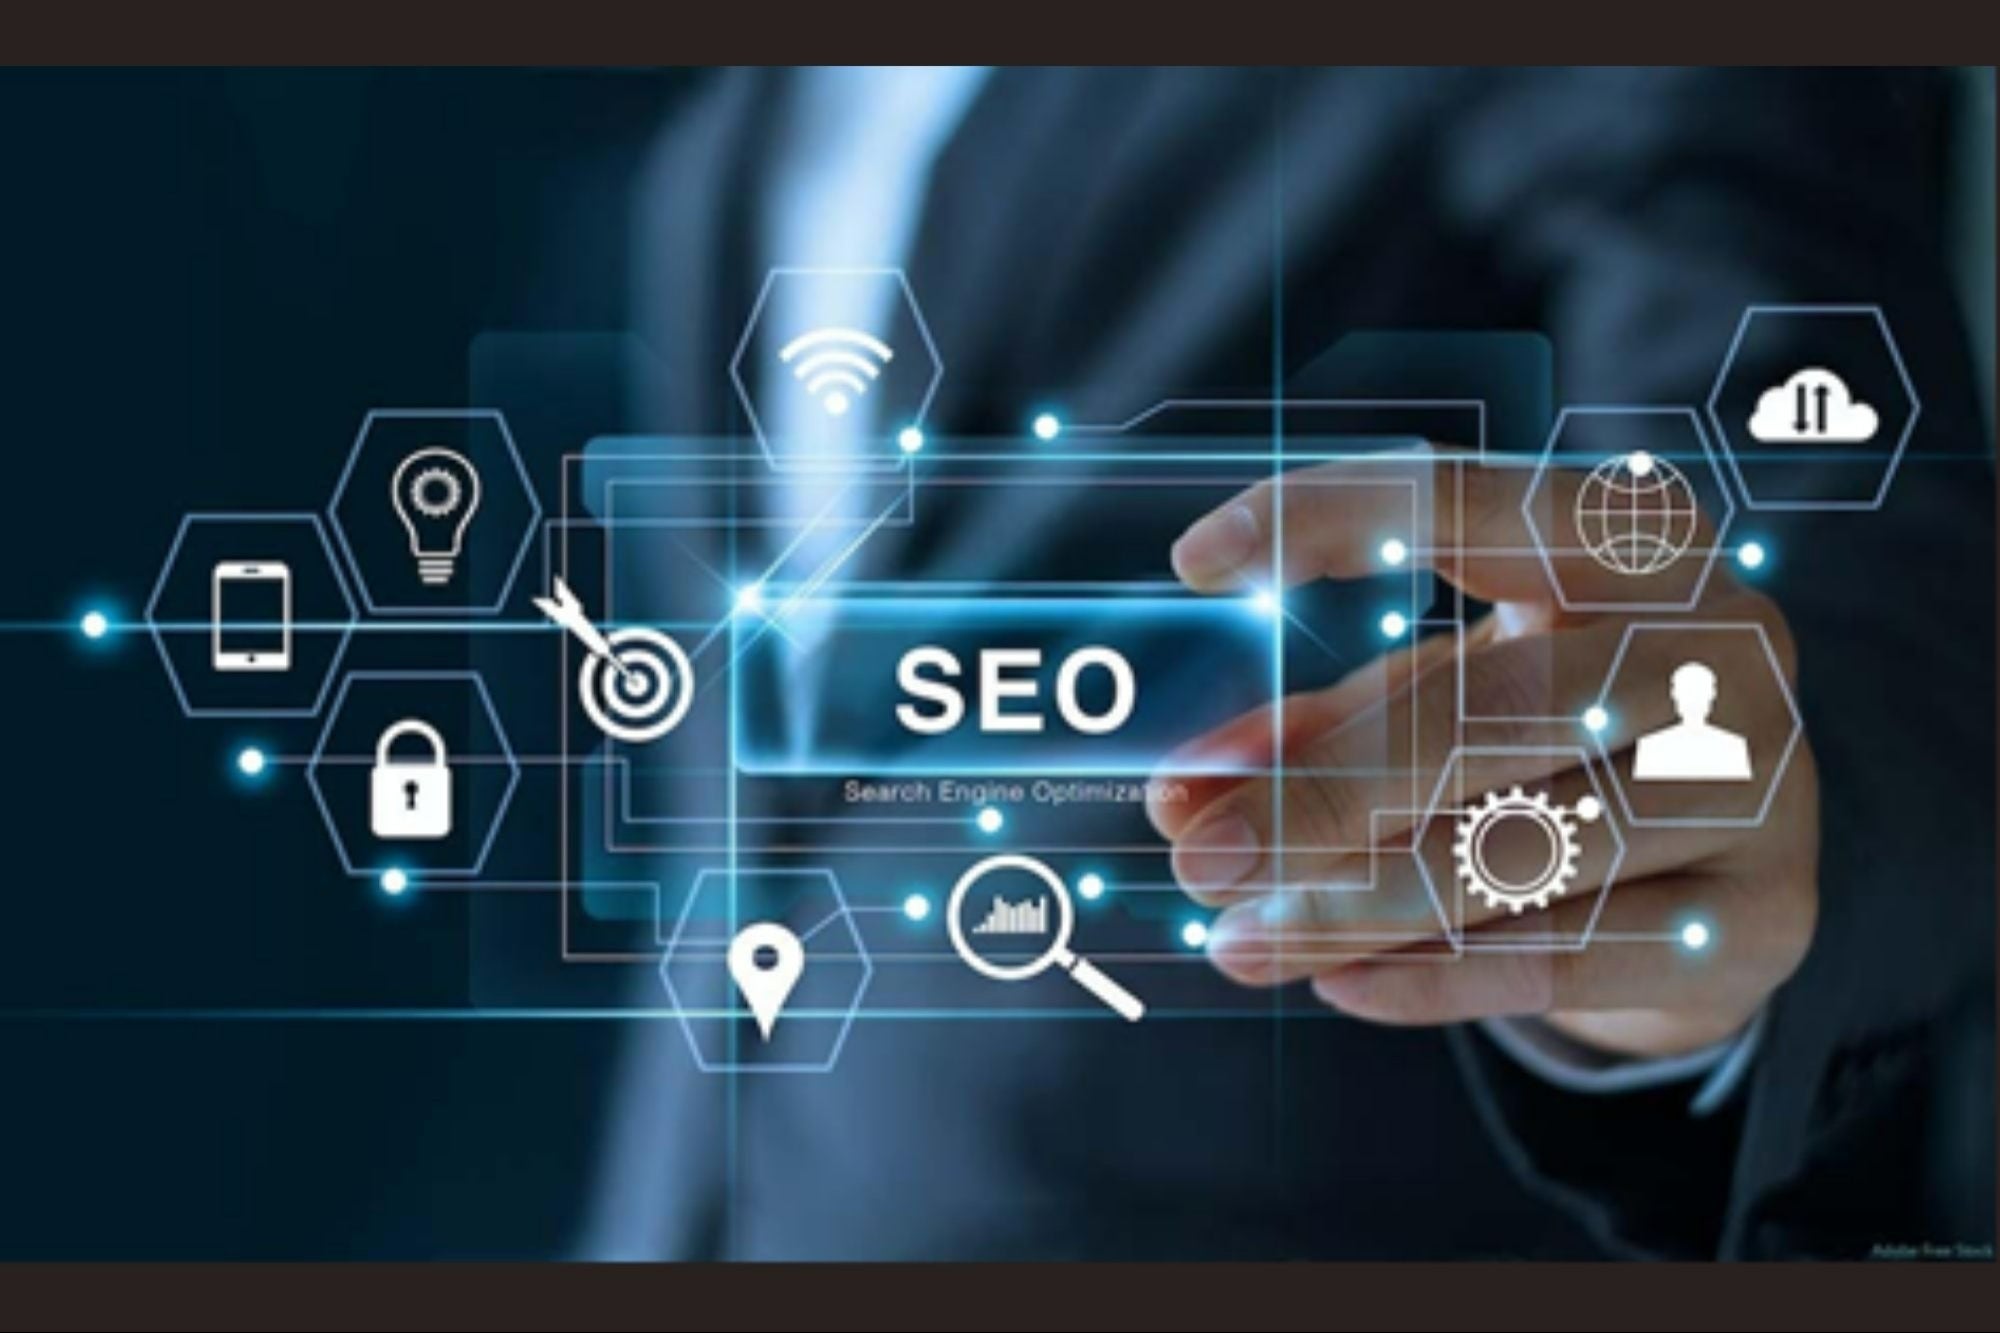 What Are the Benefits of Using Dofollow SEO Backlinks